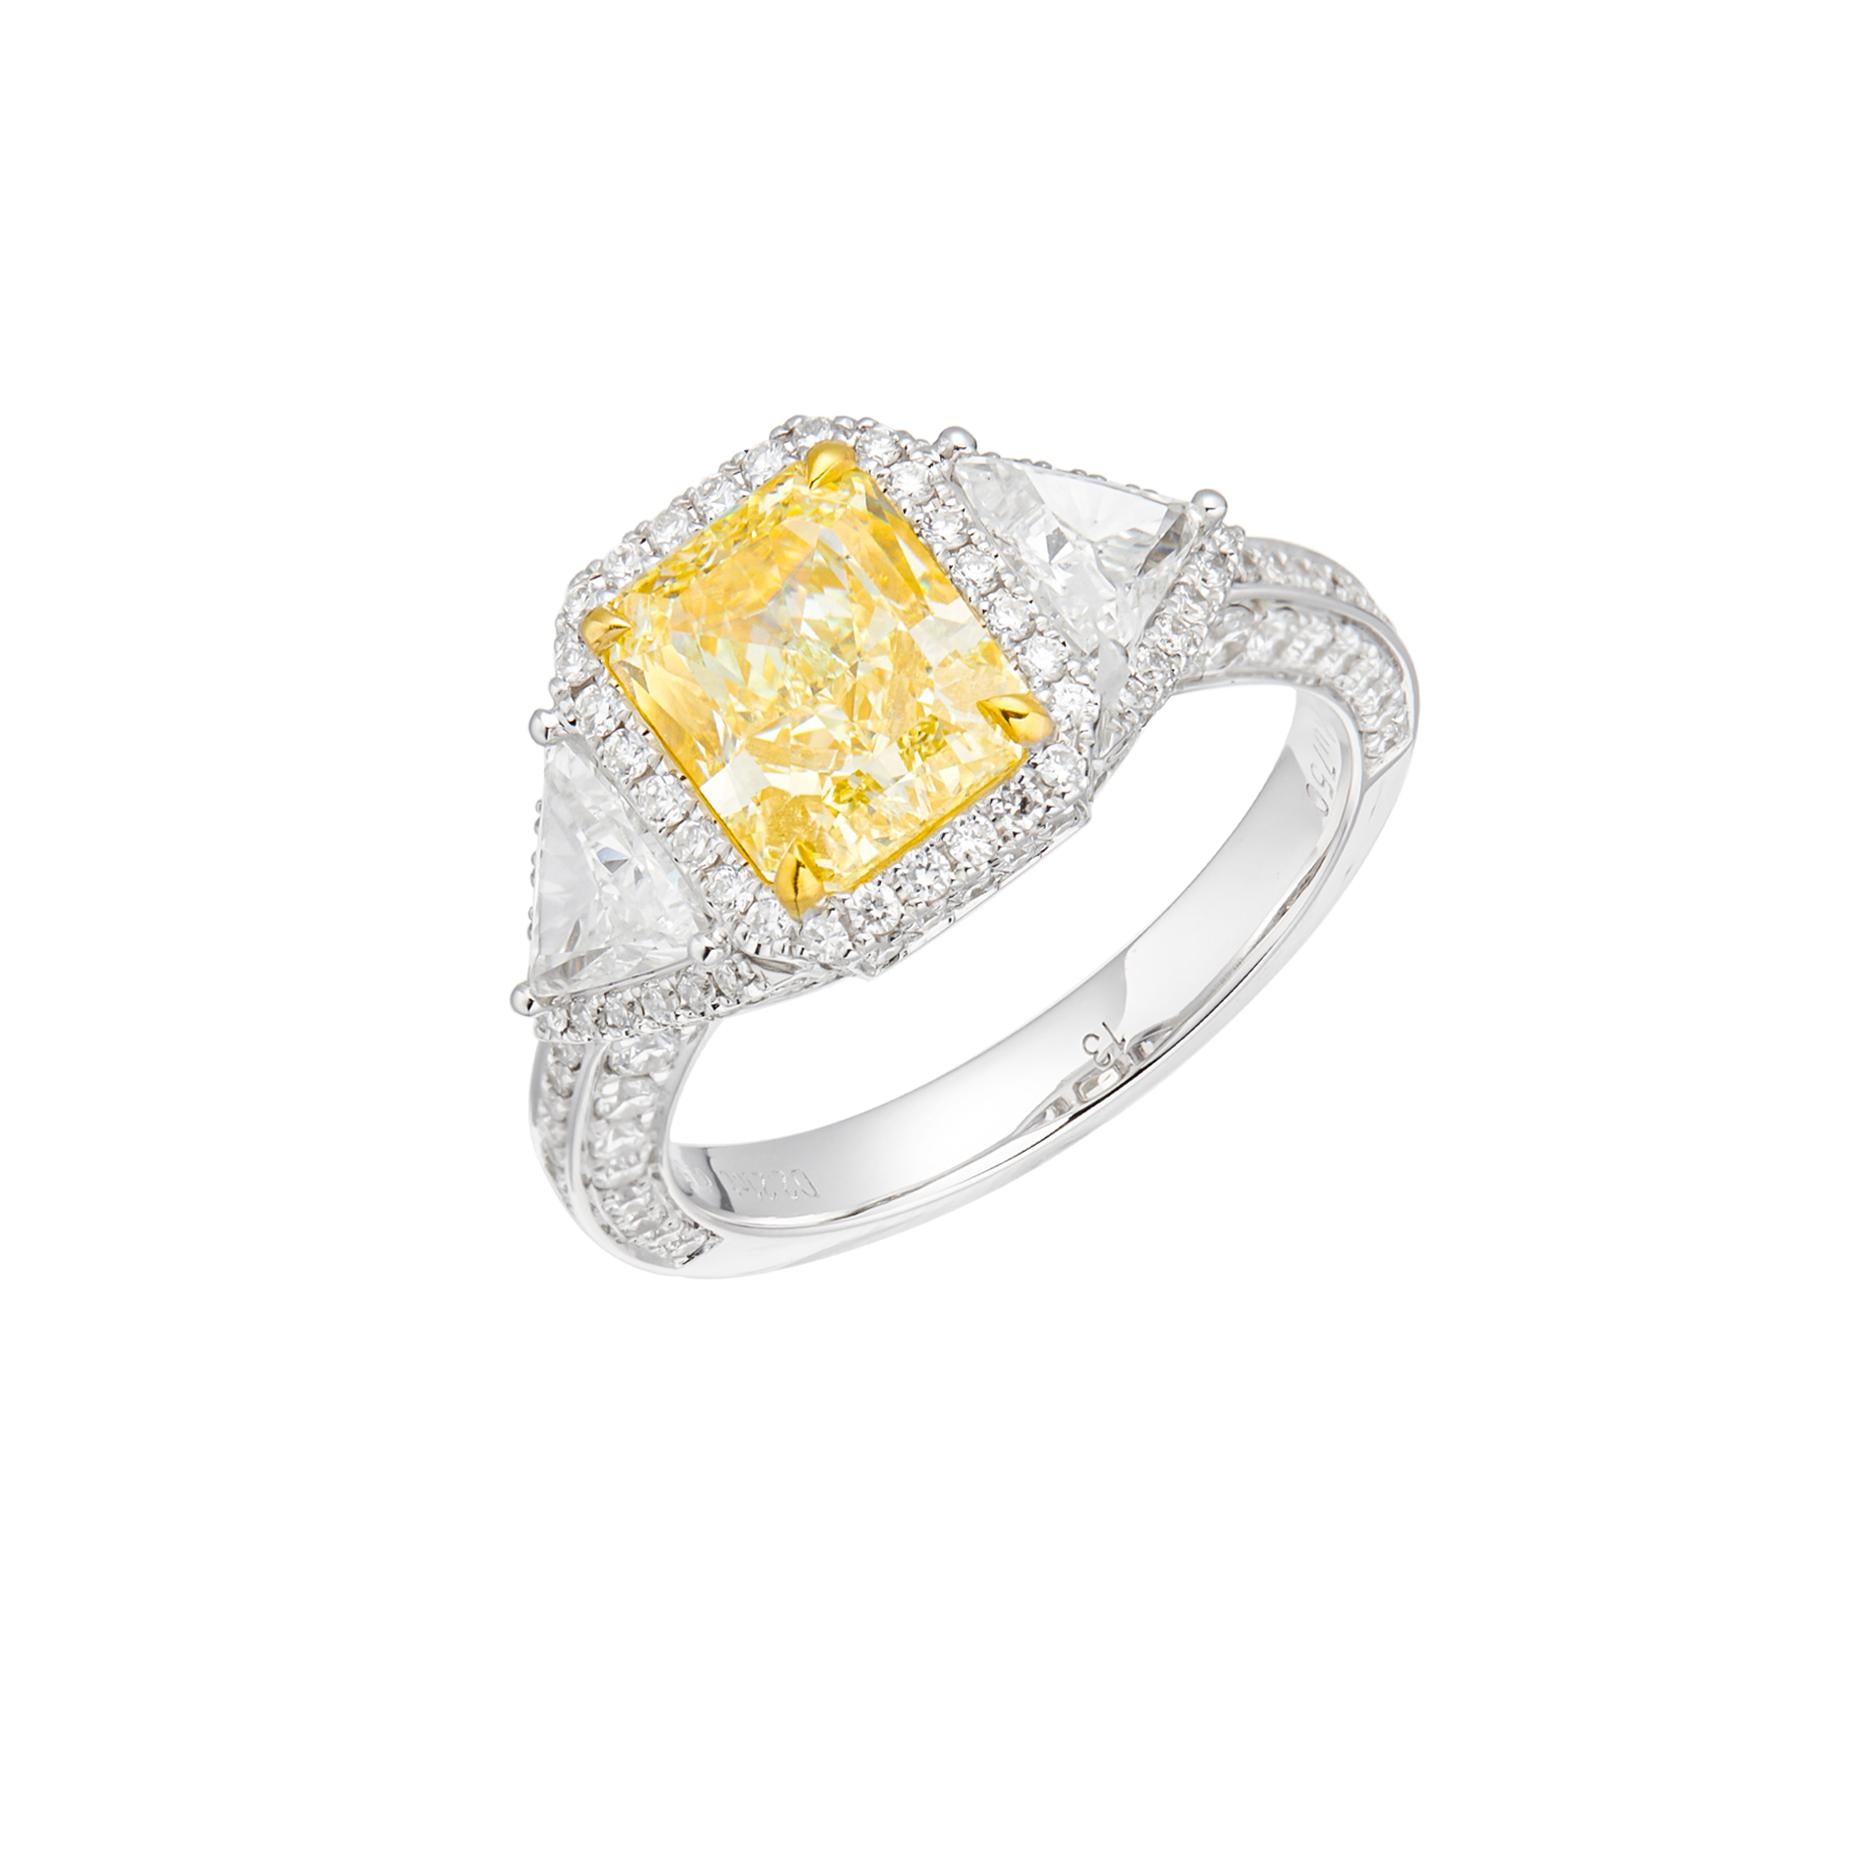 Behold a masterpiece of brilliance and radiance – a GIA Certified 2.21 carat Natural Radiant Cut Fancy Light Yellow Diamond Solitaire Ring, elegantly set on a bed of 18kt gold. This extraordinary piece captures the essence of sophistication and